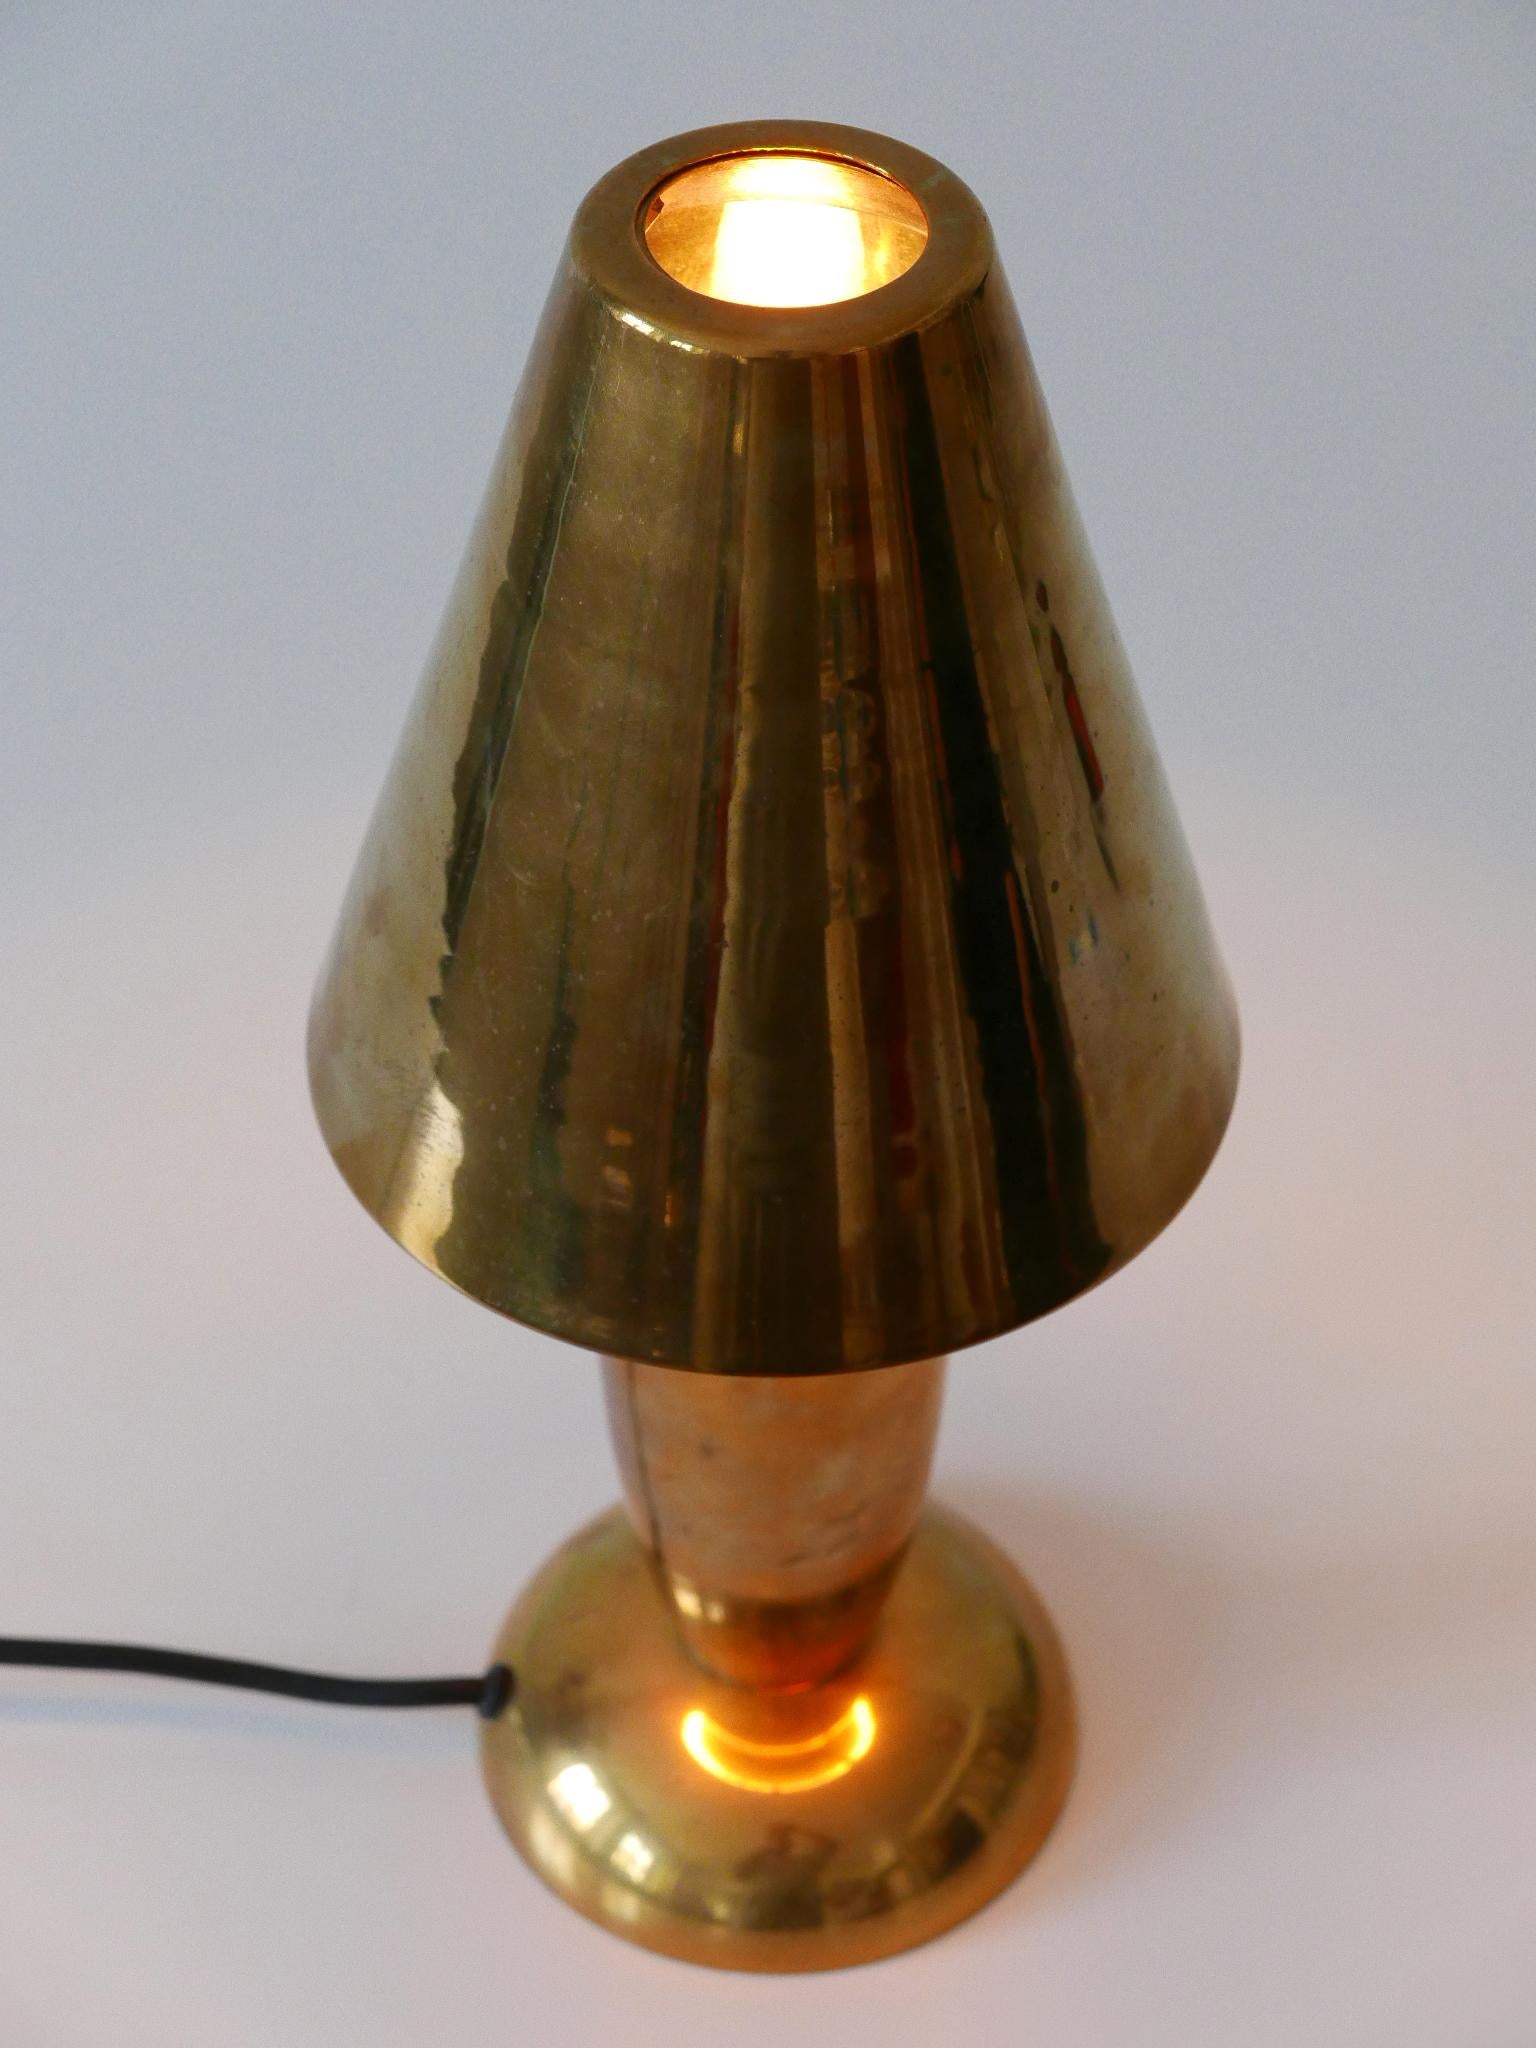 Rare & Lovely Mid-Century Modern Brass Side Table Lamp by Lambert Germany 1970s For Sale 10